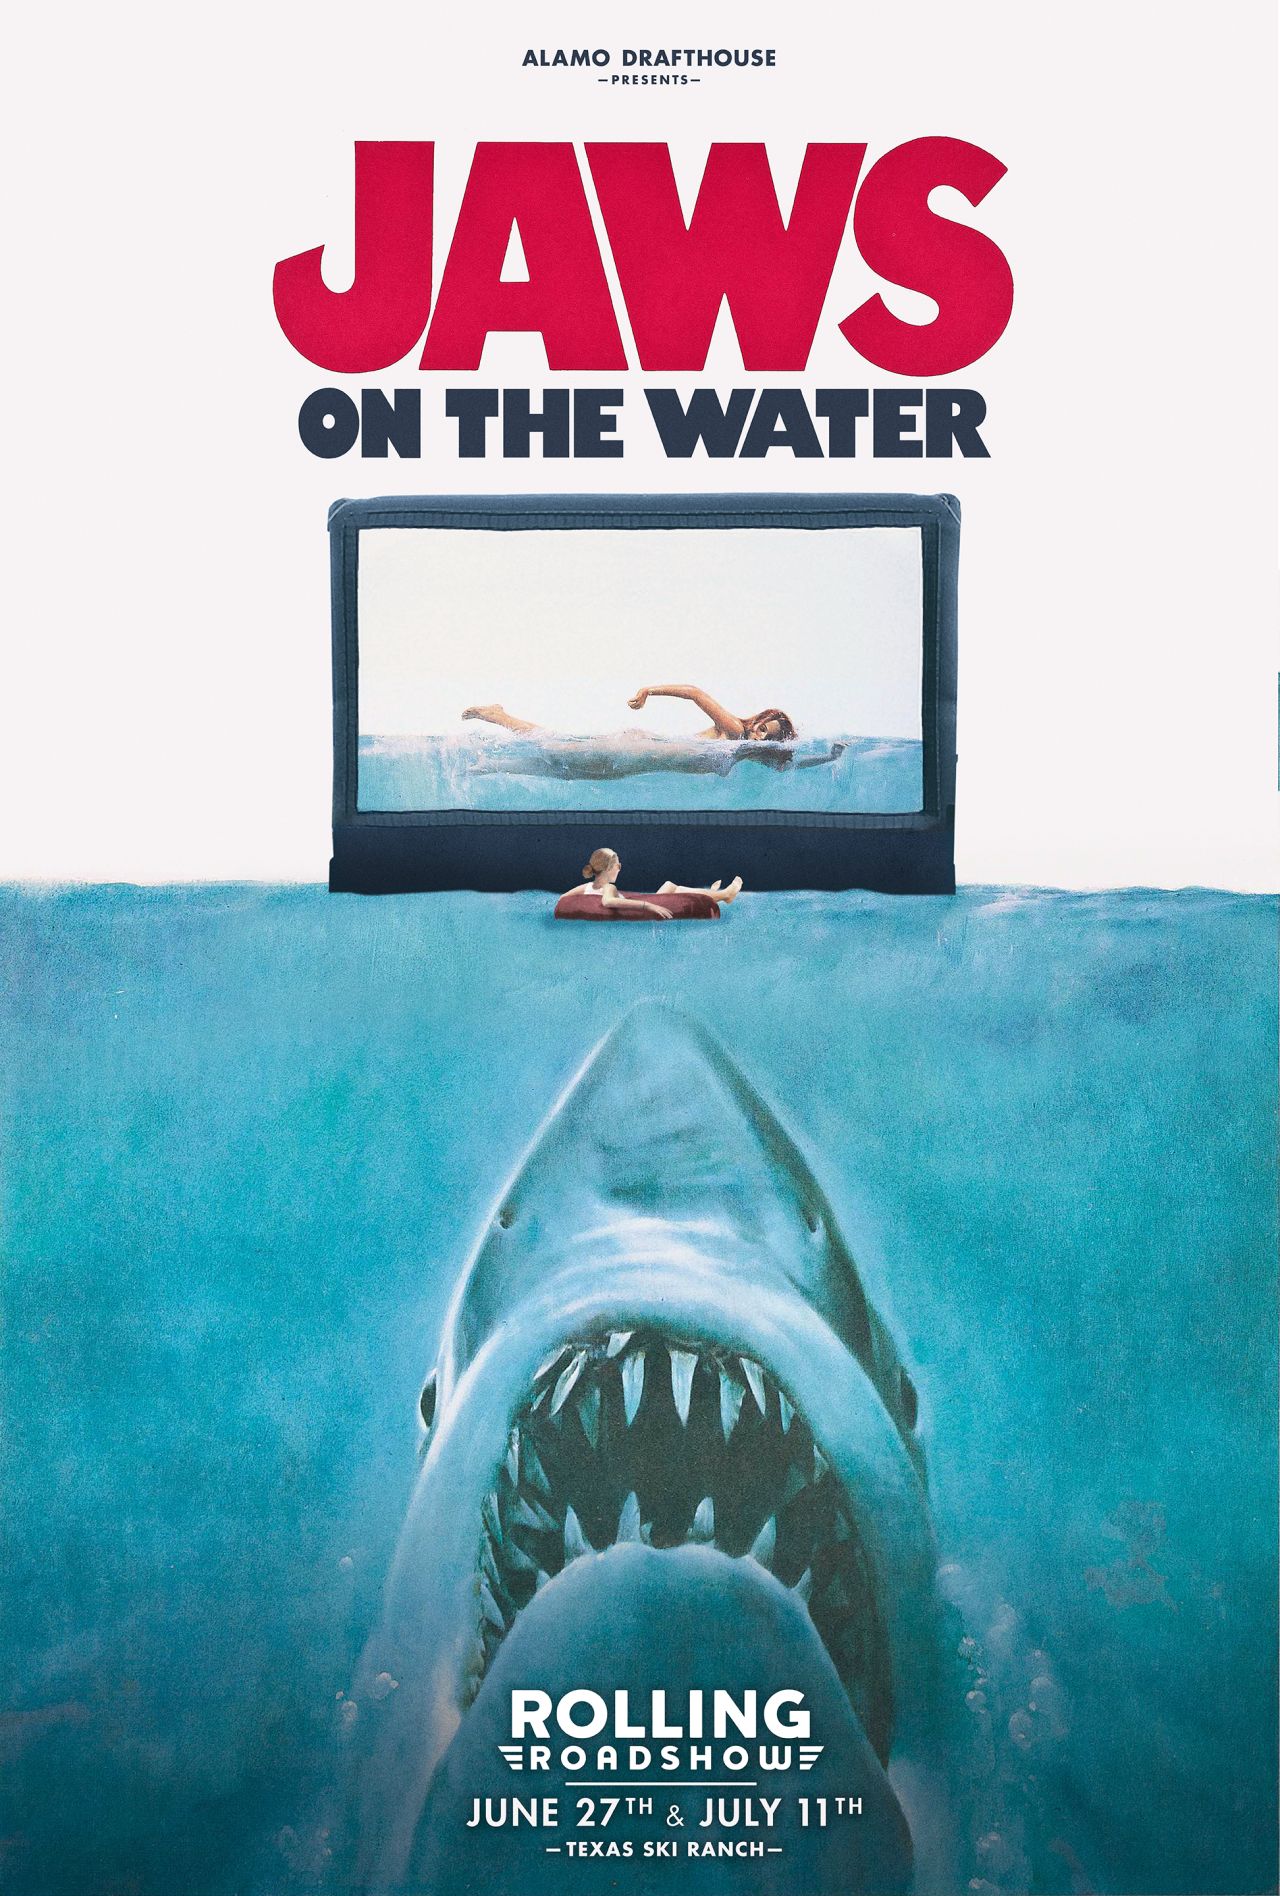 The second of two "Jaws on the Water" screenings takes place this weekend on a man-made Texas water skiing lake. 